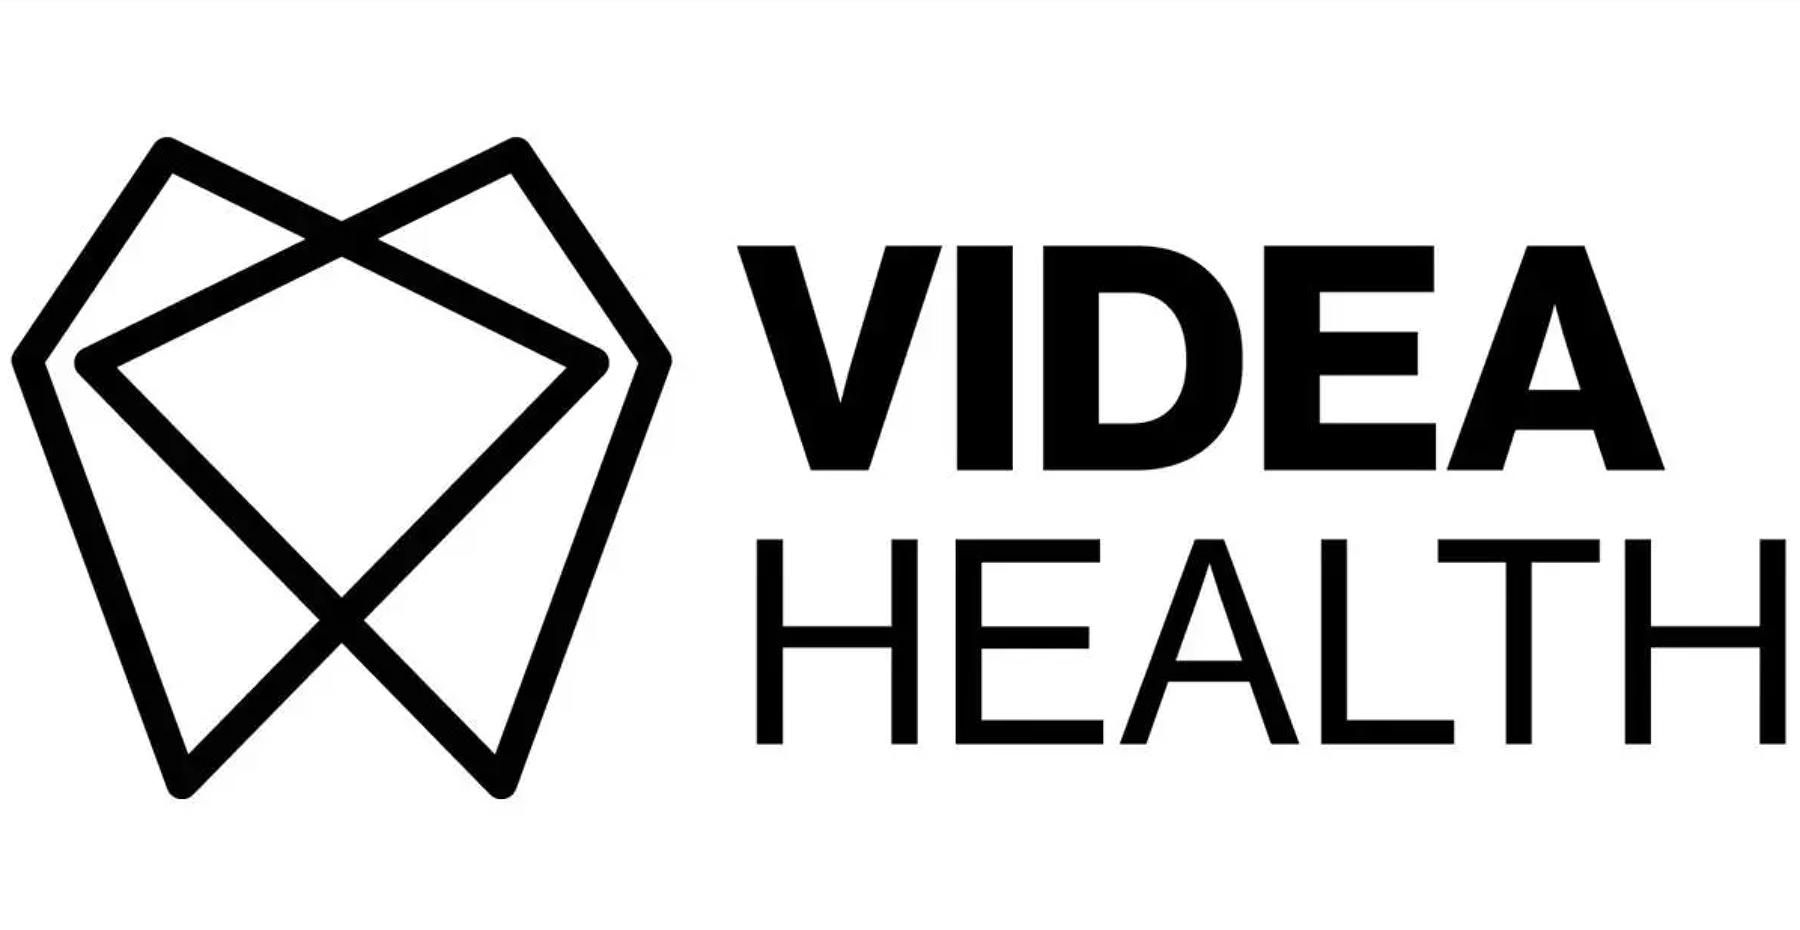 VideaHealth Garners the only FDA-cleared Dental AI Pediatric Algorithm on the Market |Image Credit: © VideaHealth